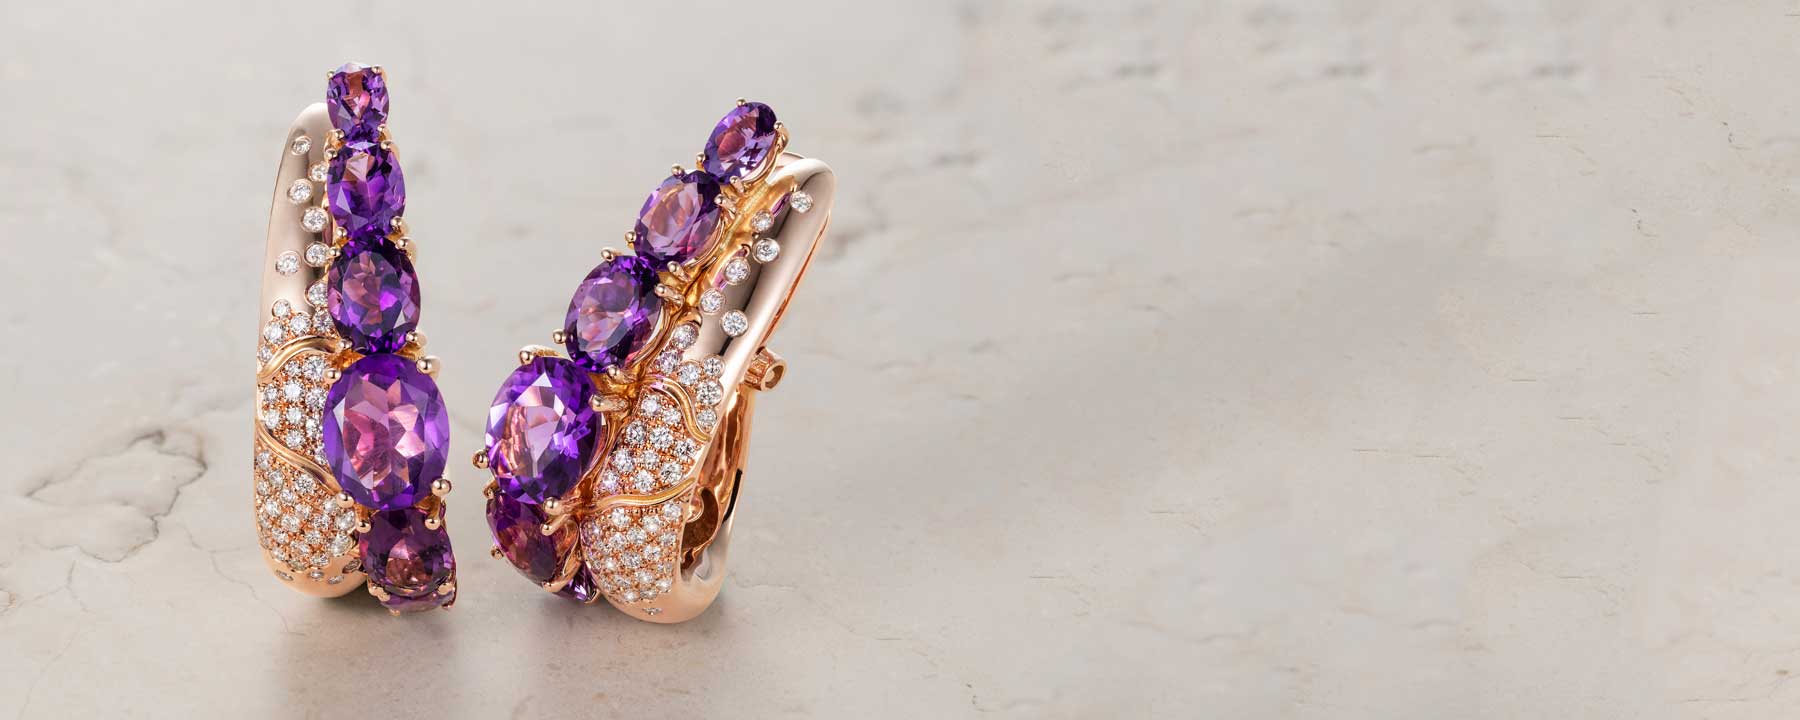 Bespoke earrings in 18ct rose Fairtrade Gold, fair-traded purple amethyst and conflict-free diamonds 